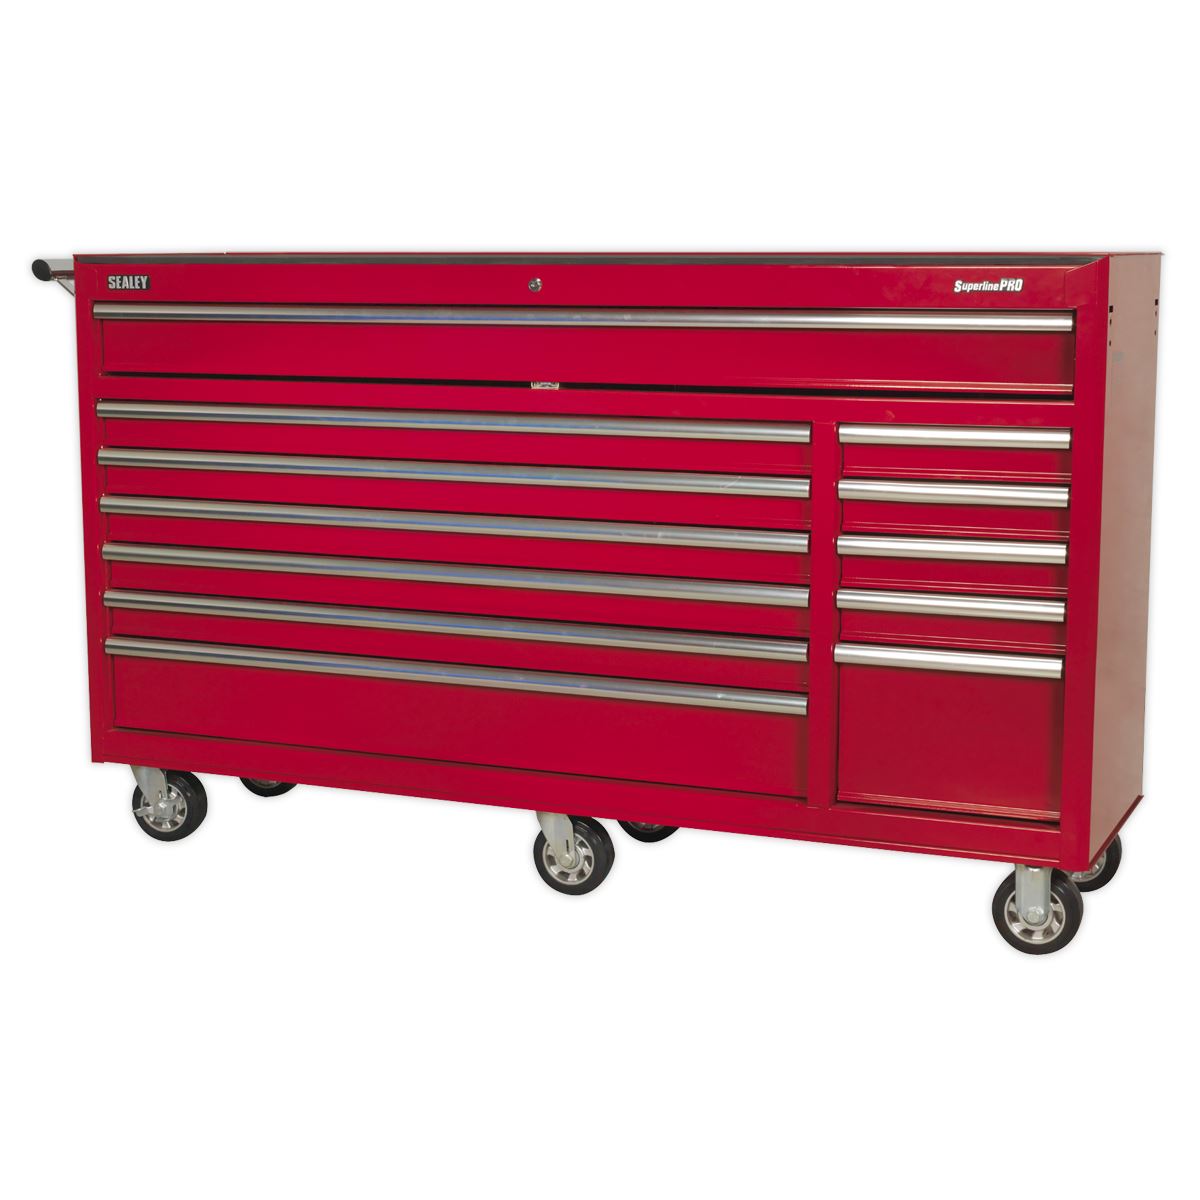 Sealey Superline Pro Rollcab 12 Drawer with Ball-Bearing Slides Heavy-Duty - Red